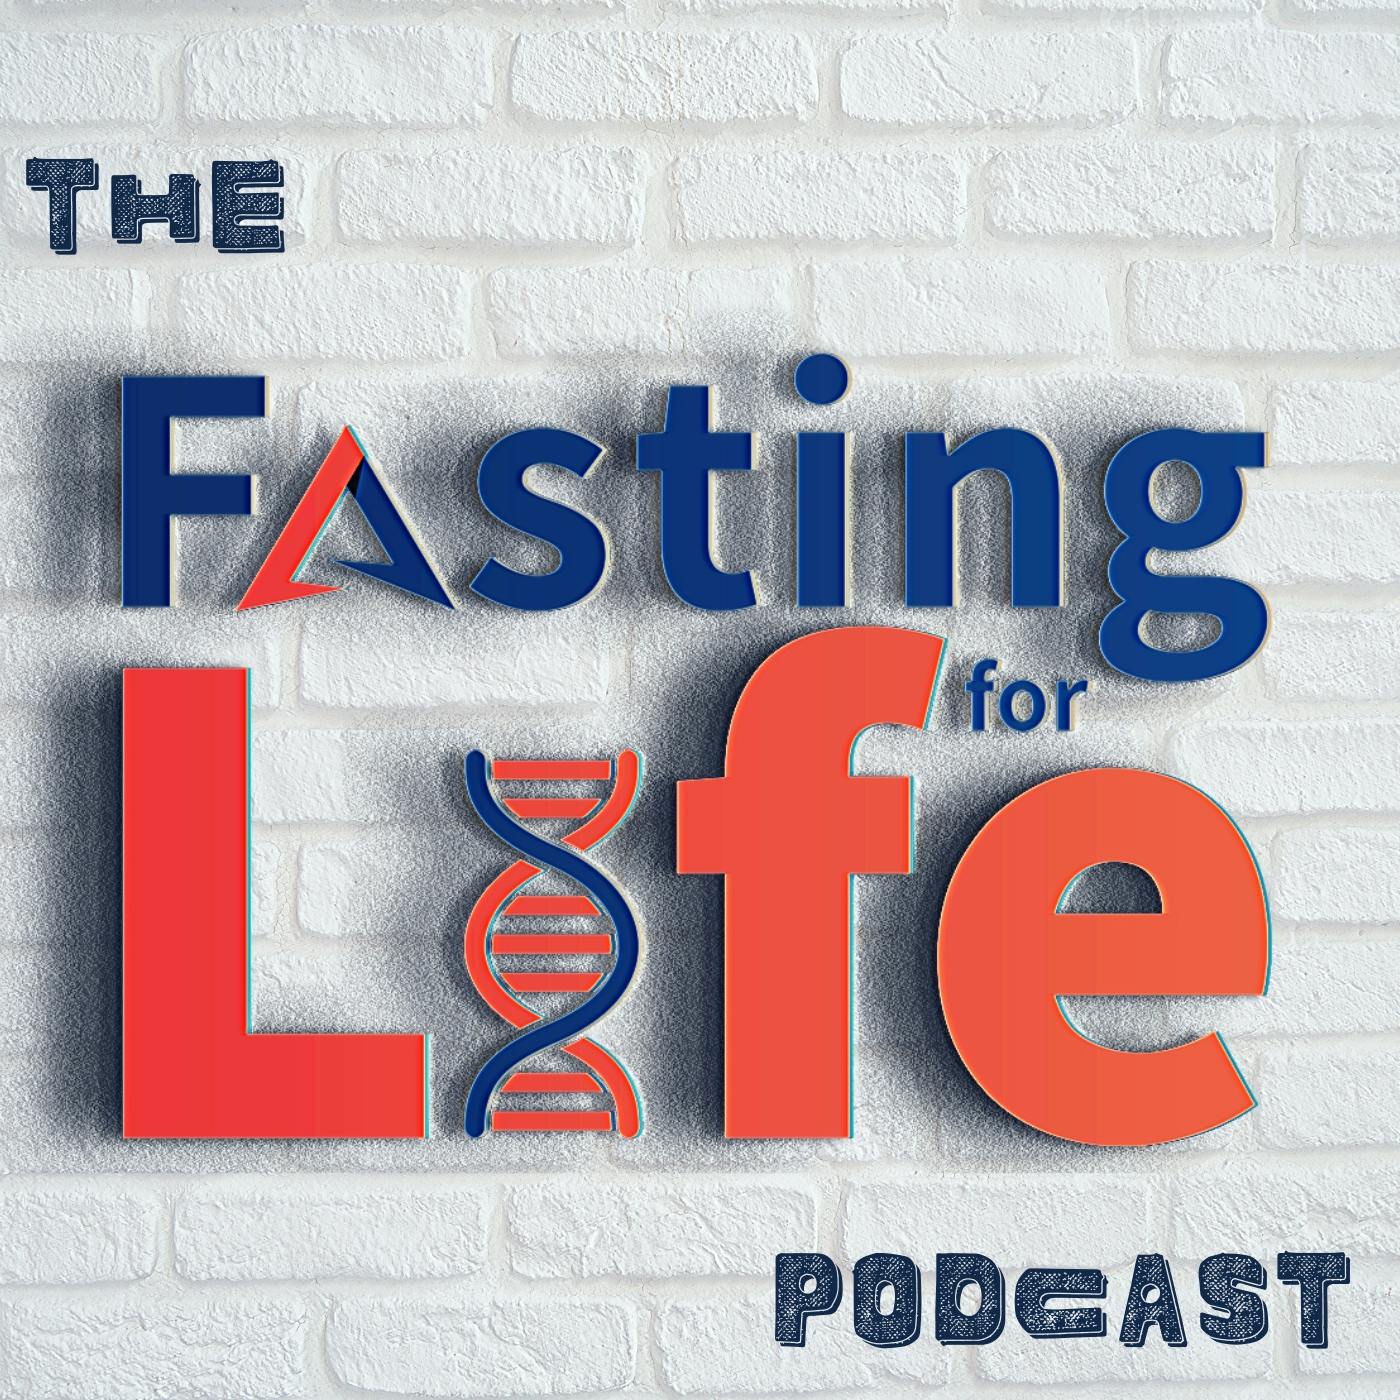 Ep. 171 - Fasting & Eating for optimal health, performance, & longevity | How weight, food choices, & calories affect lifespan | How to stop an on/off fasting mindset to gain consistency | CGM data to